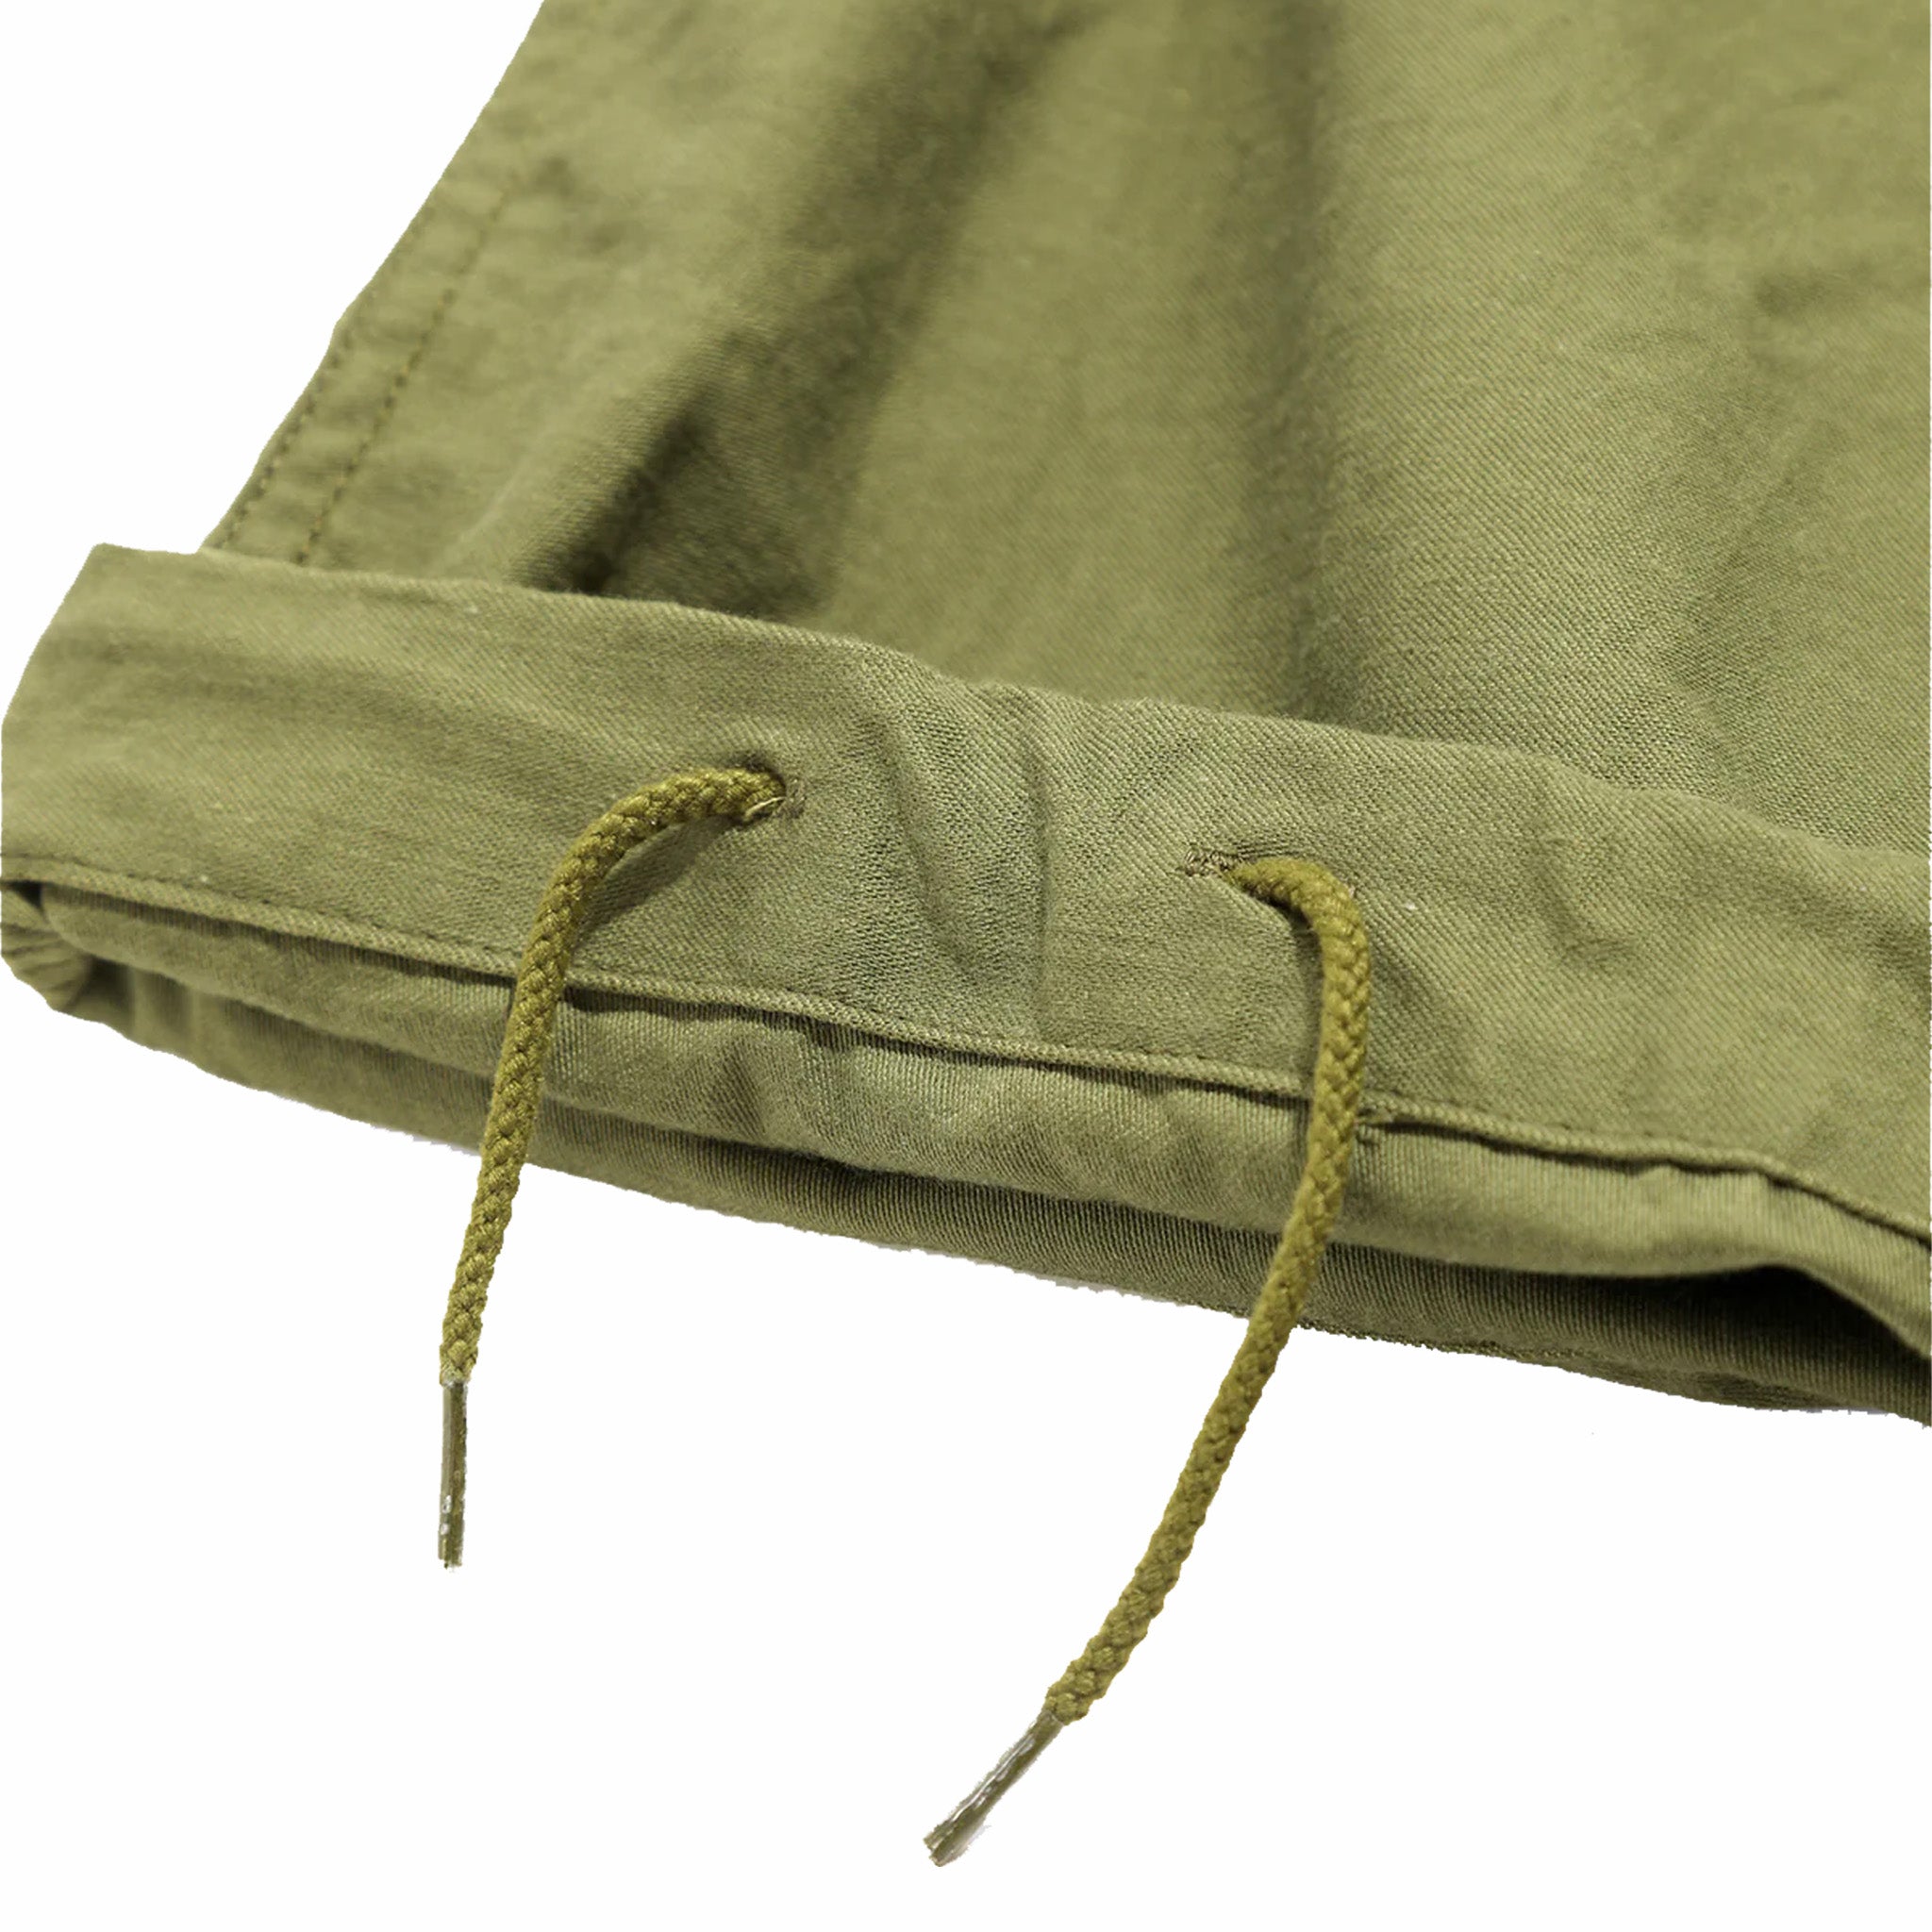 Needles String Fatigue Pant - Back Sateen (Olive)